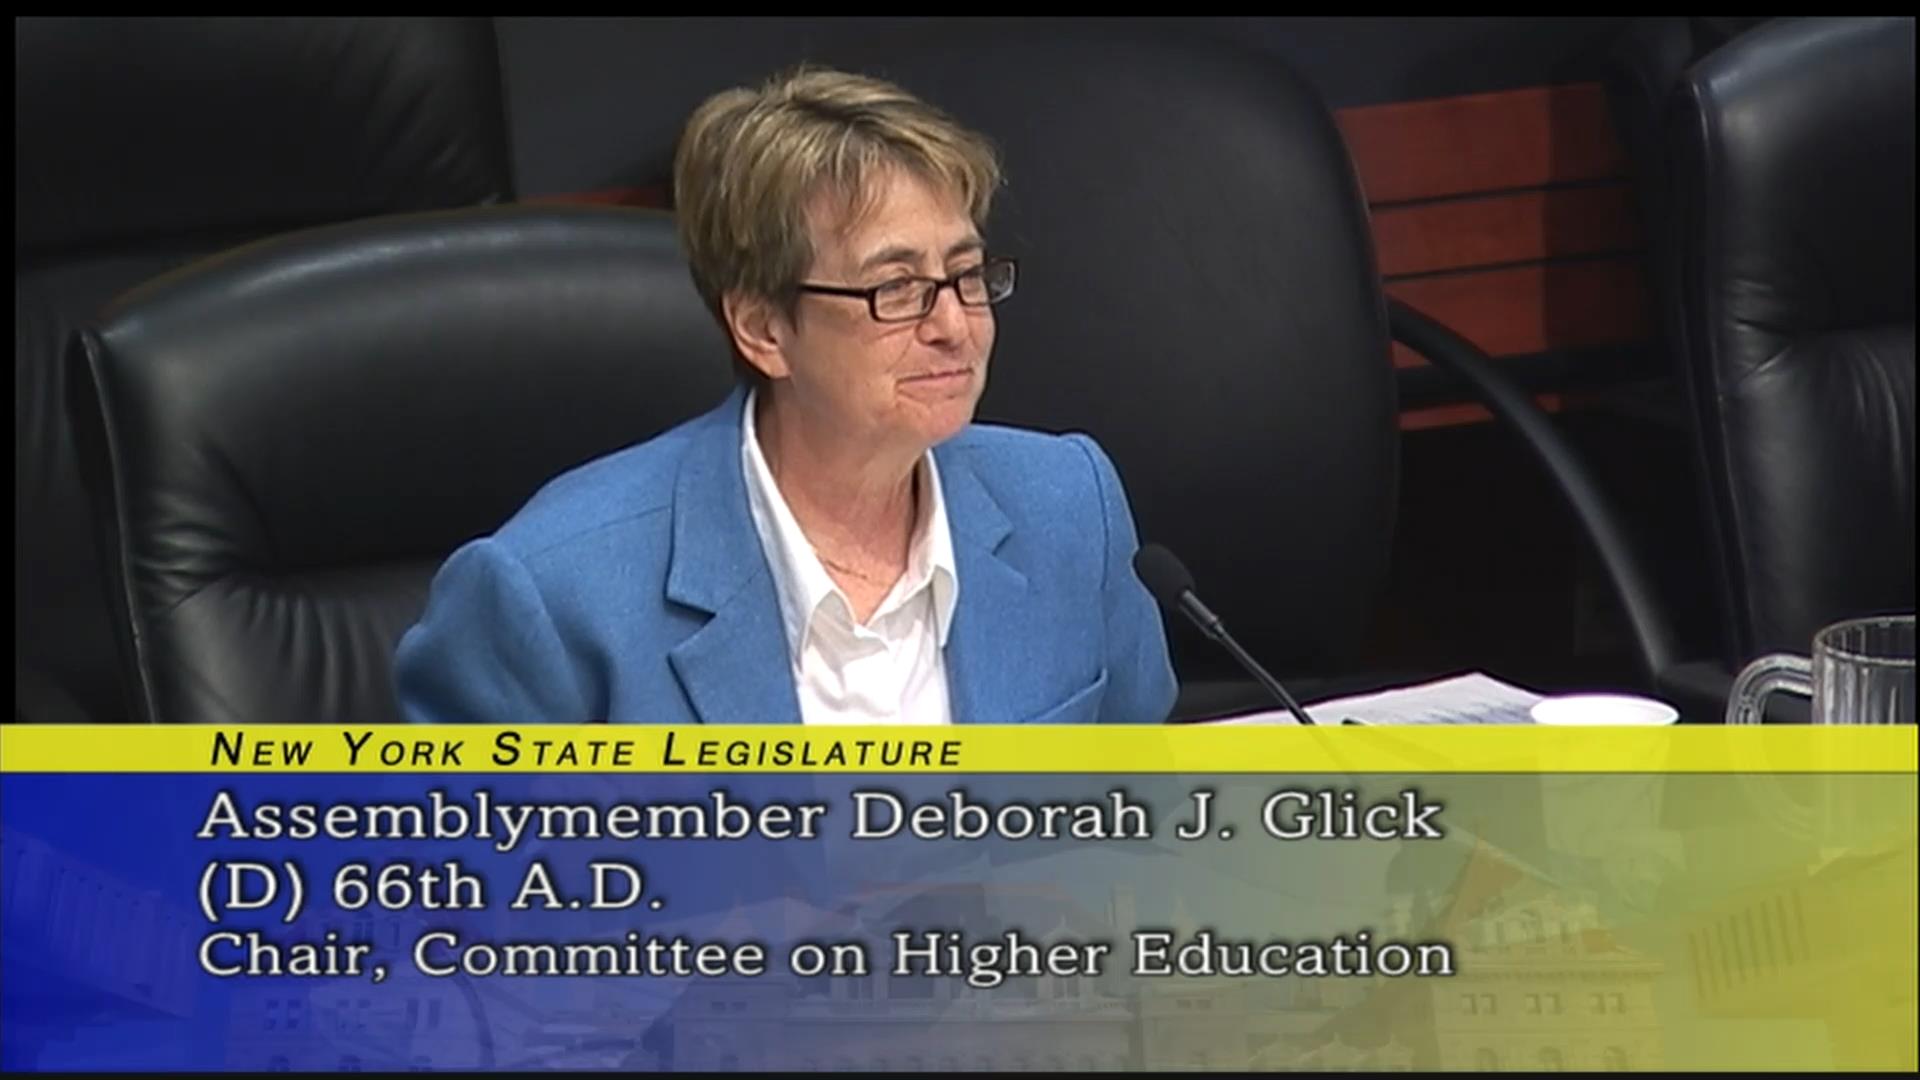 Assemblymember Glick Ensuring High-Quality, Public Higher Education